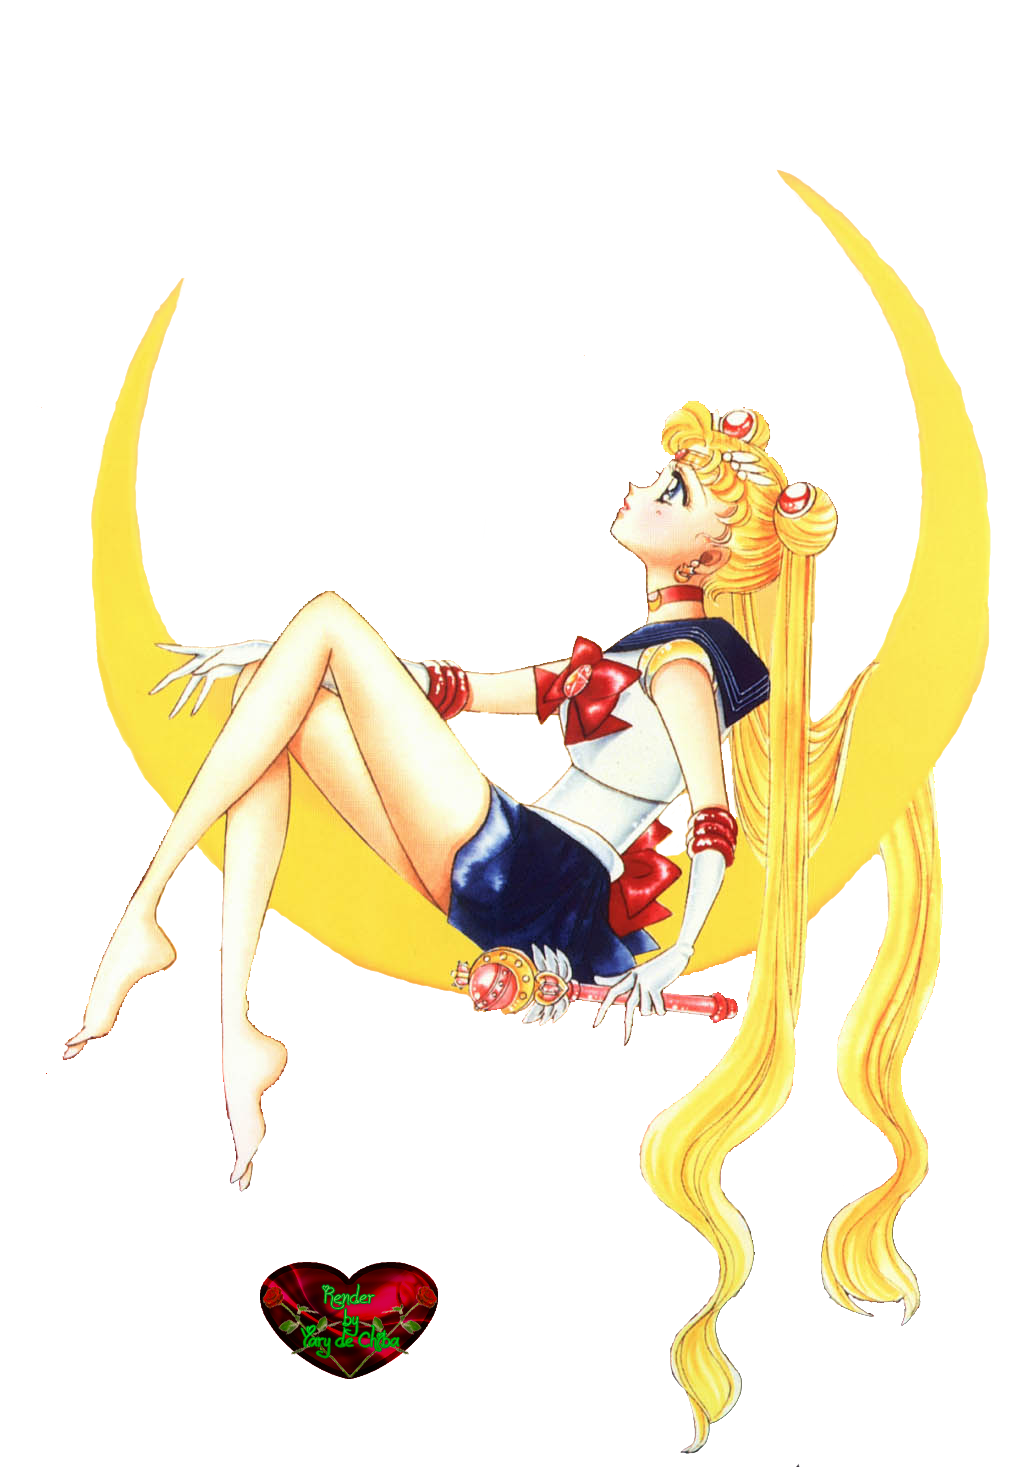 render__sailor__moon_by_yaryinlackech-d69h6lq.png